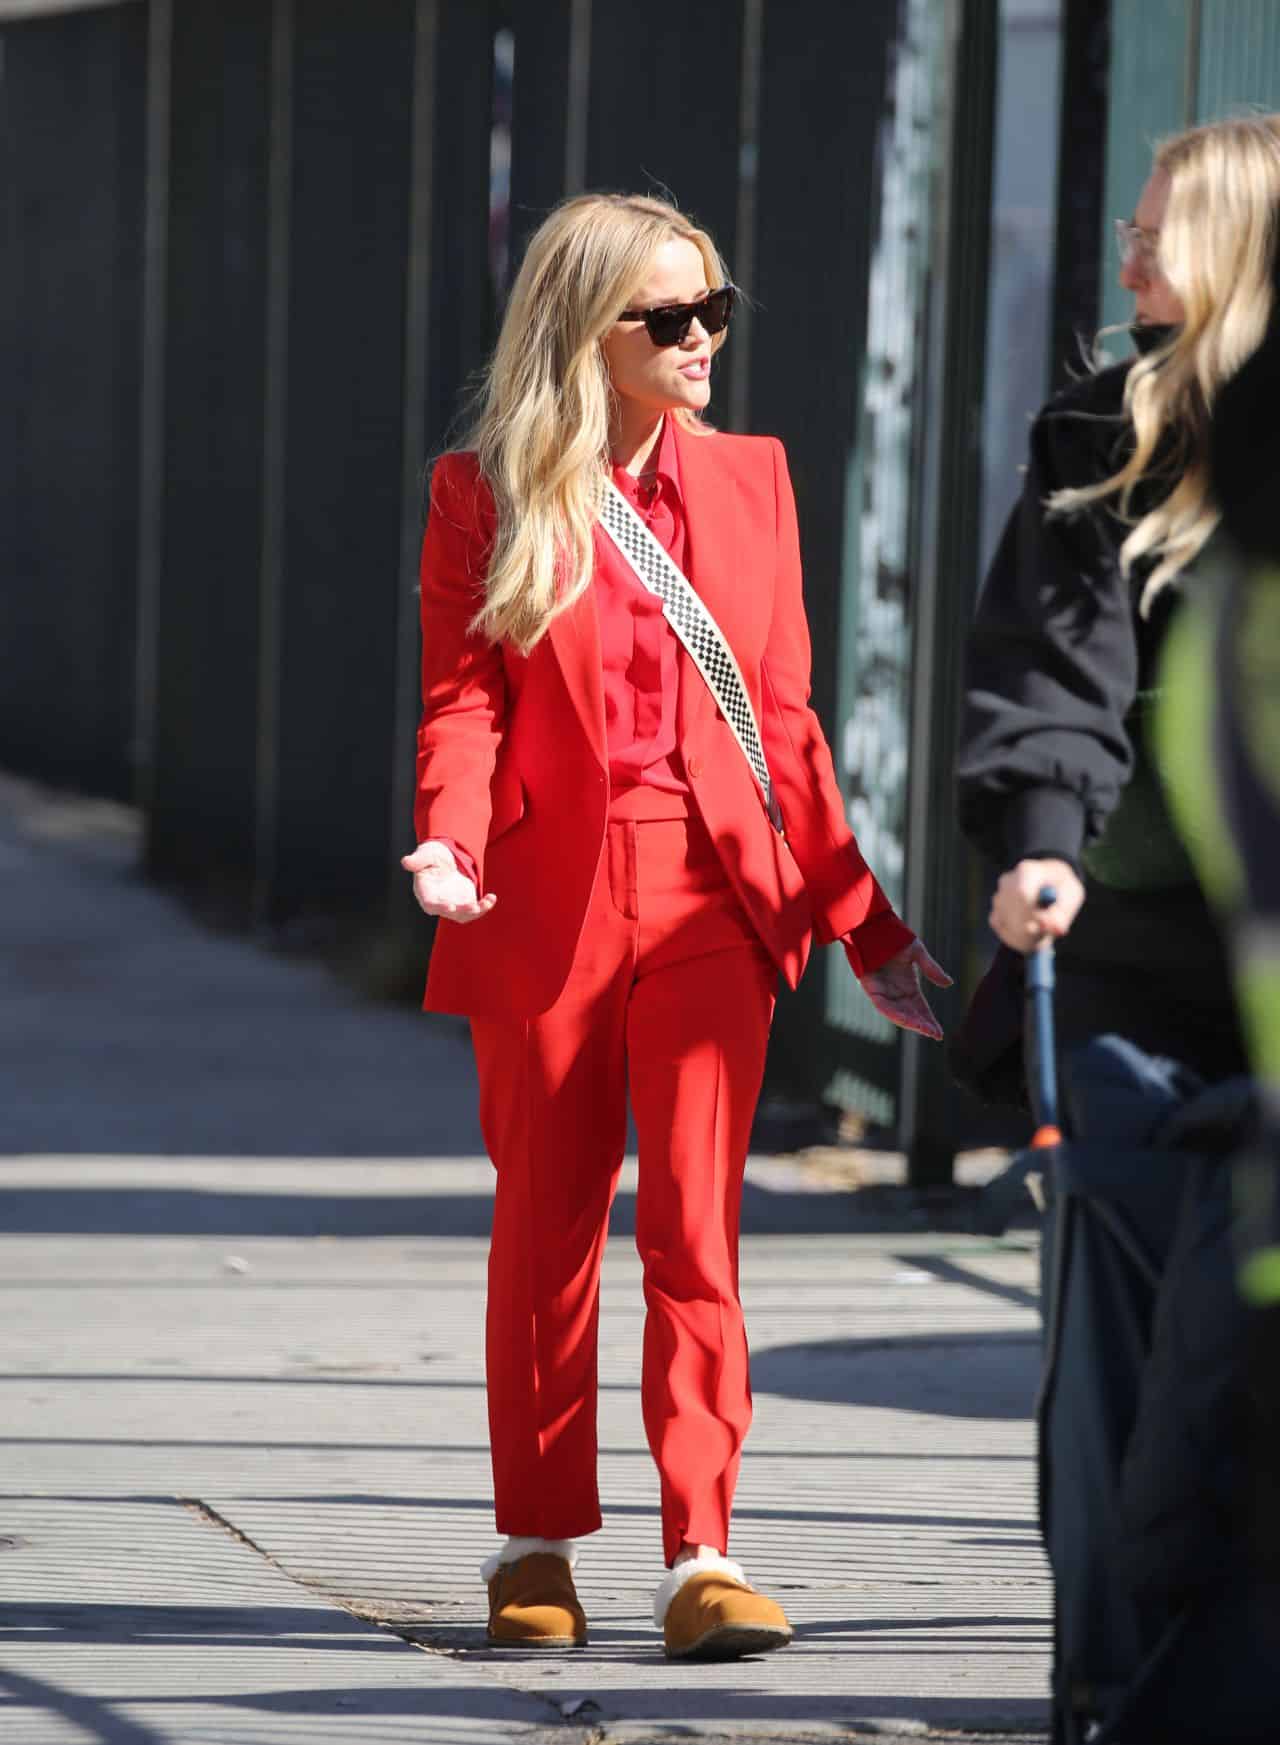 Reese Witherspoon Dazzles in Tailored Red Suit and Chic Cross-Body Bag